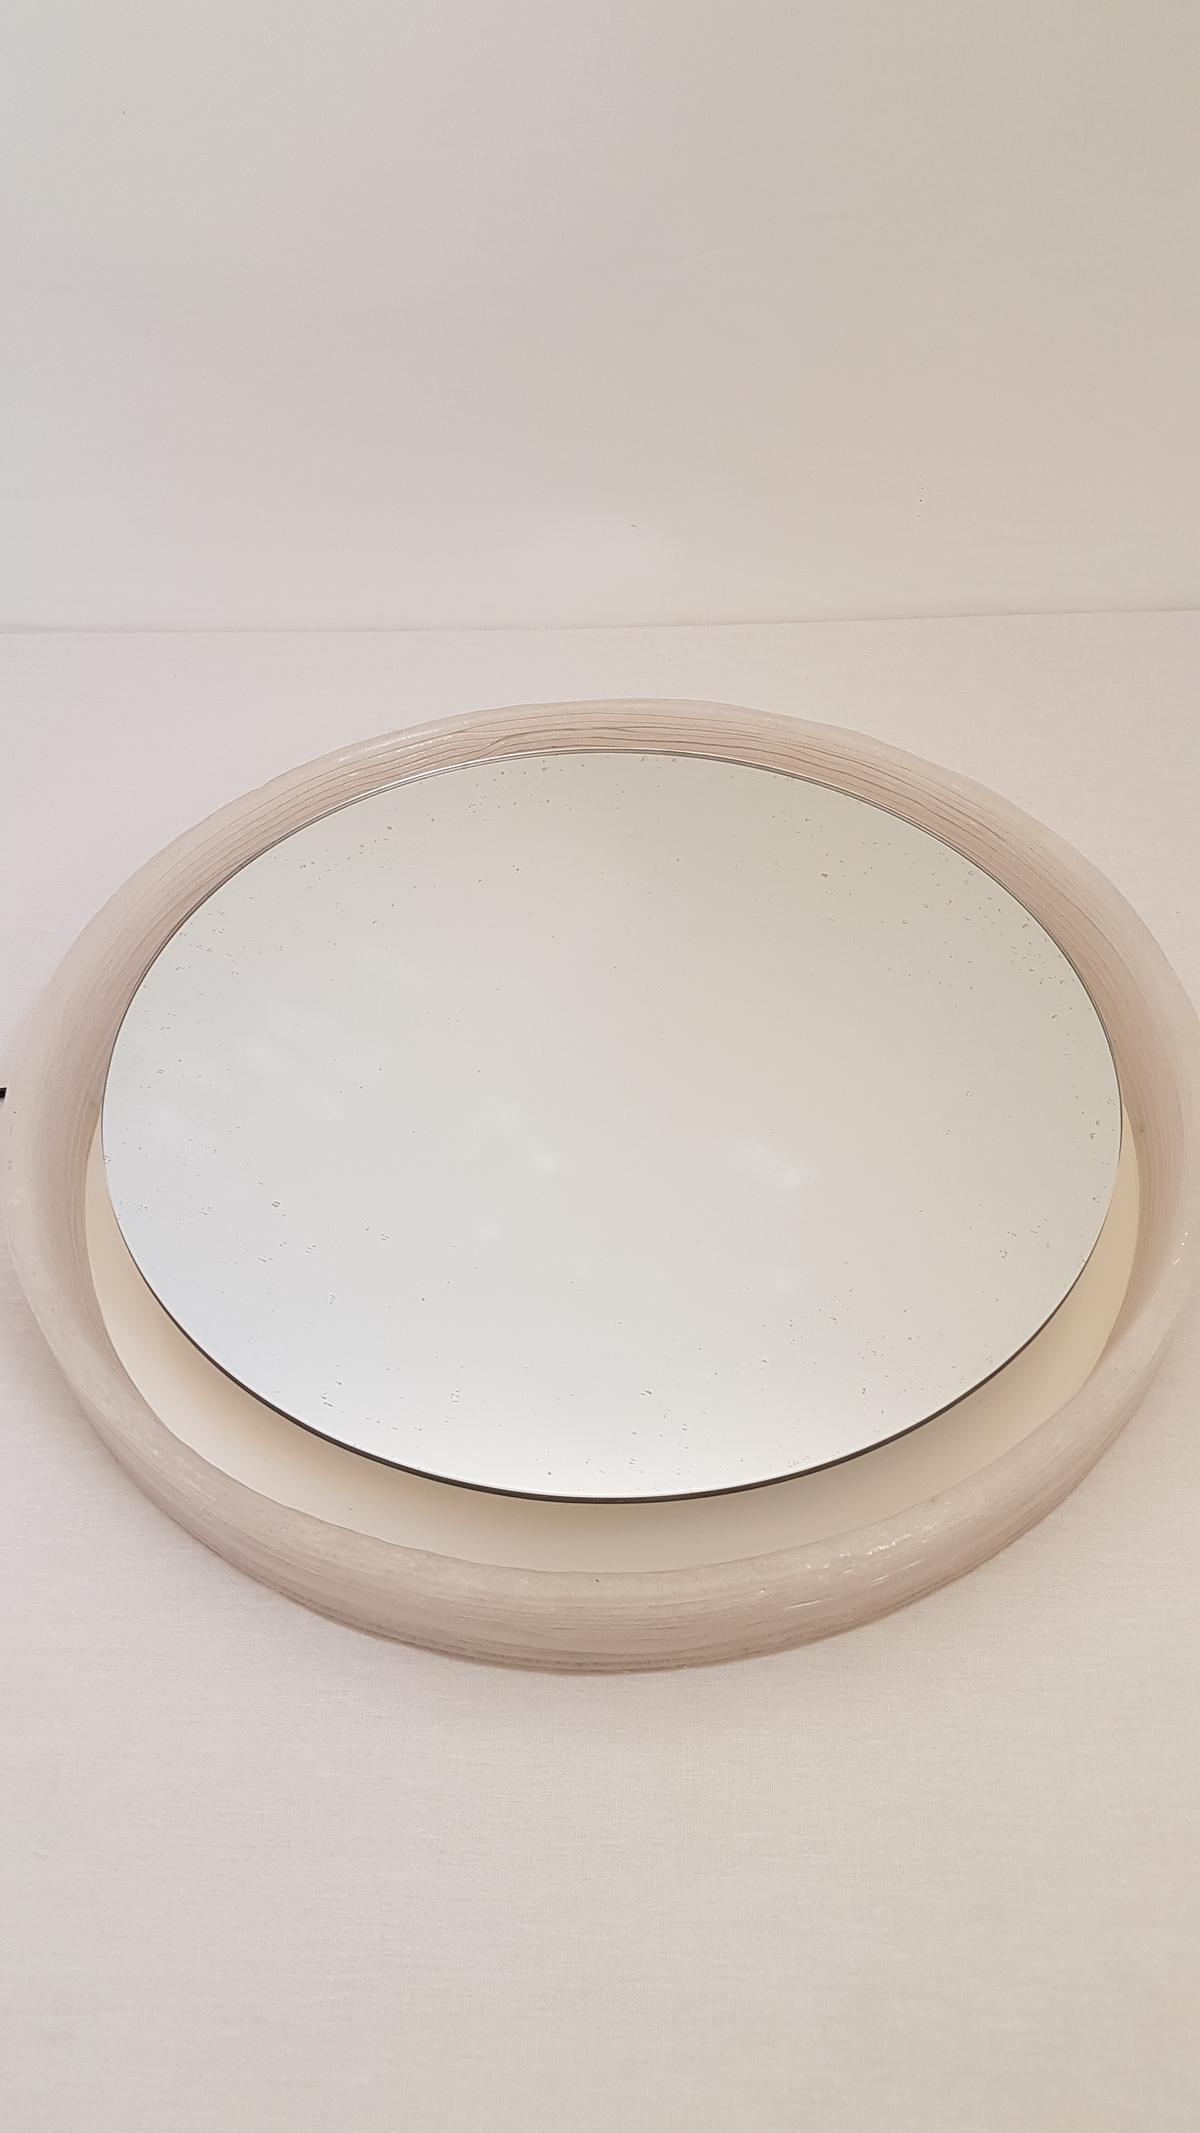 Round mirror with a smooth acrylic ice glass looking edge - Hillebrand - 1970s